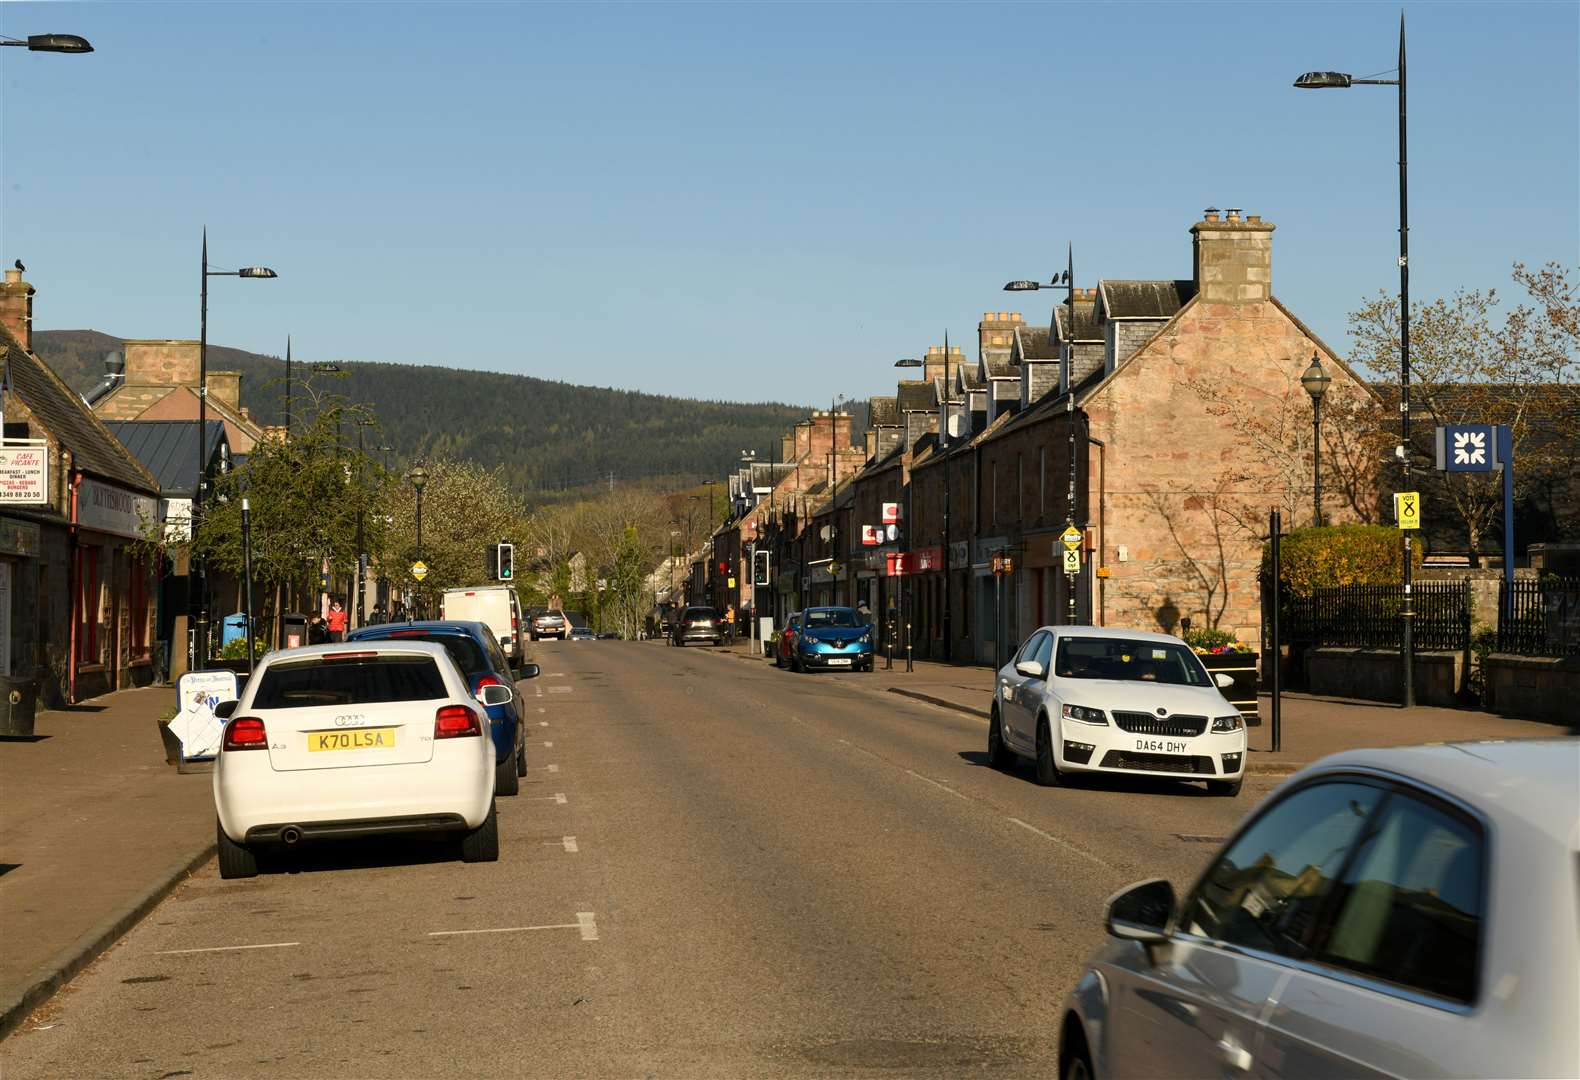 The attack happened on Alness High Street, the court was told. Sentence has been deferred for background and restriction of liberty order reports. Picture: James Mackenzie.